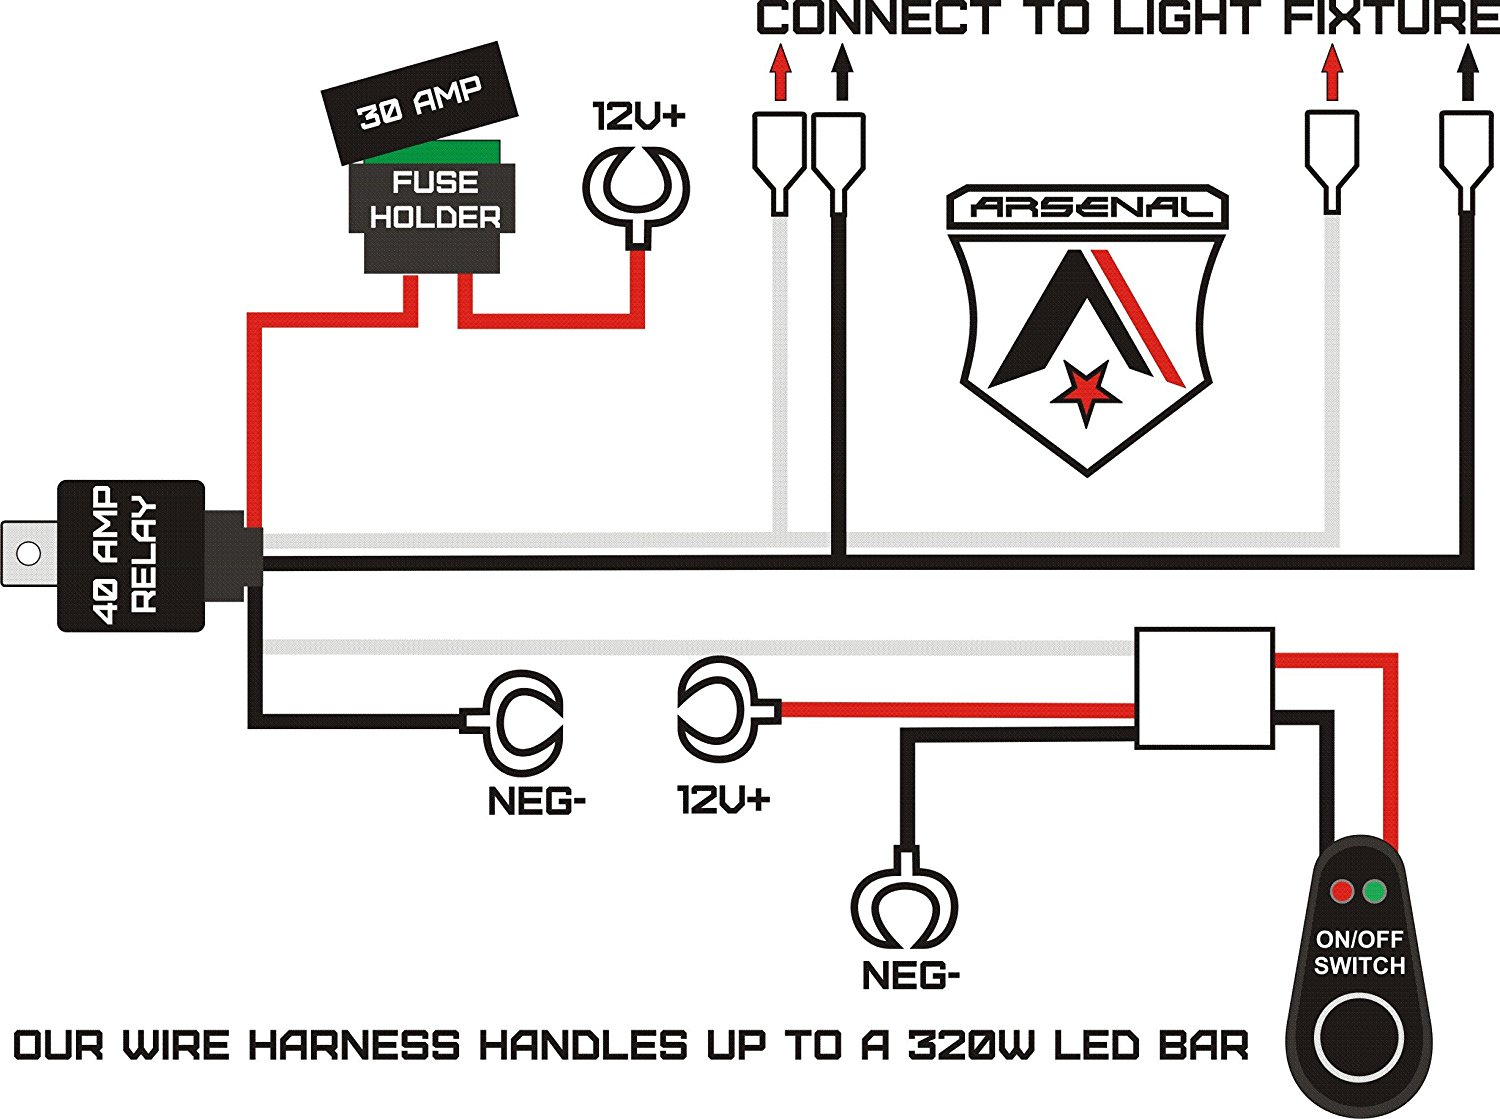 Wiring Harness Diagram - Wiring Diagrams Click - Pioneer Wiring Harness Diagram